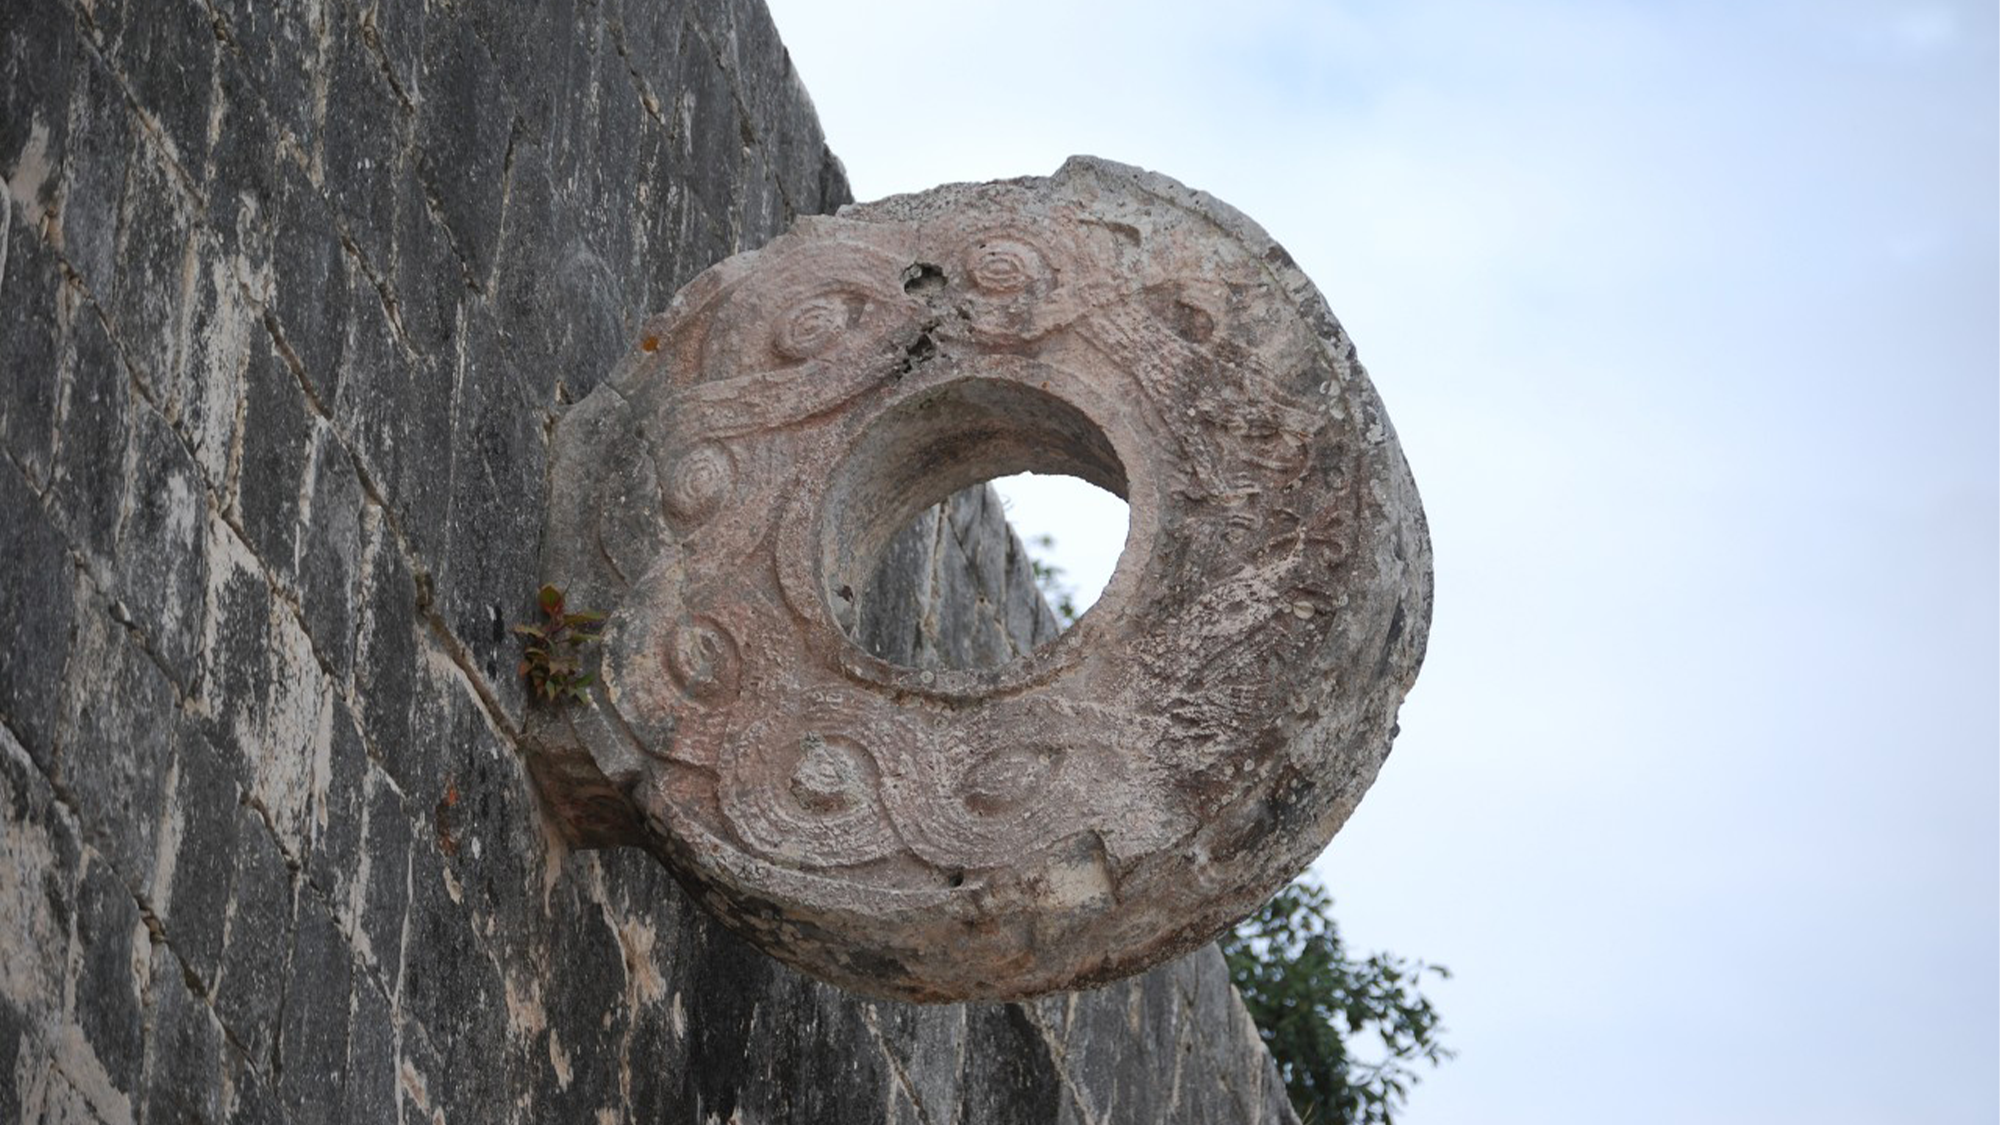 a ring affixed to a wall in the ancient Mayan city of Chichen Itza